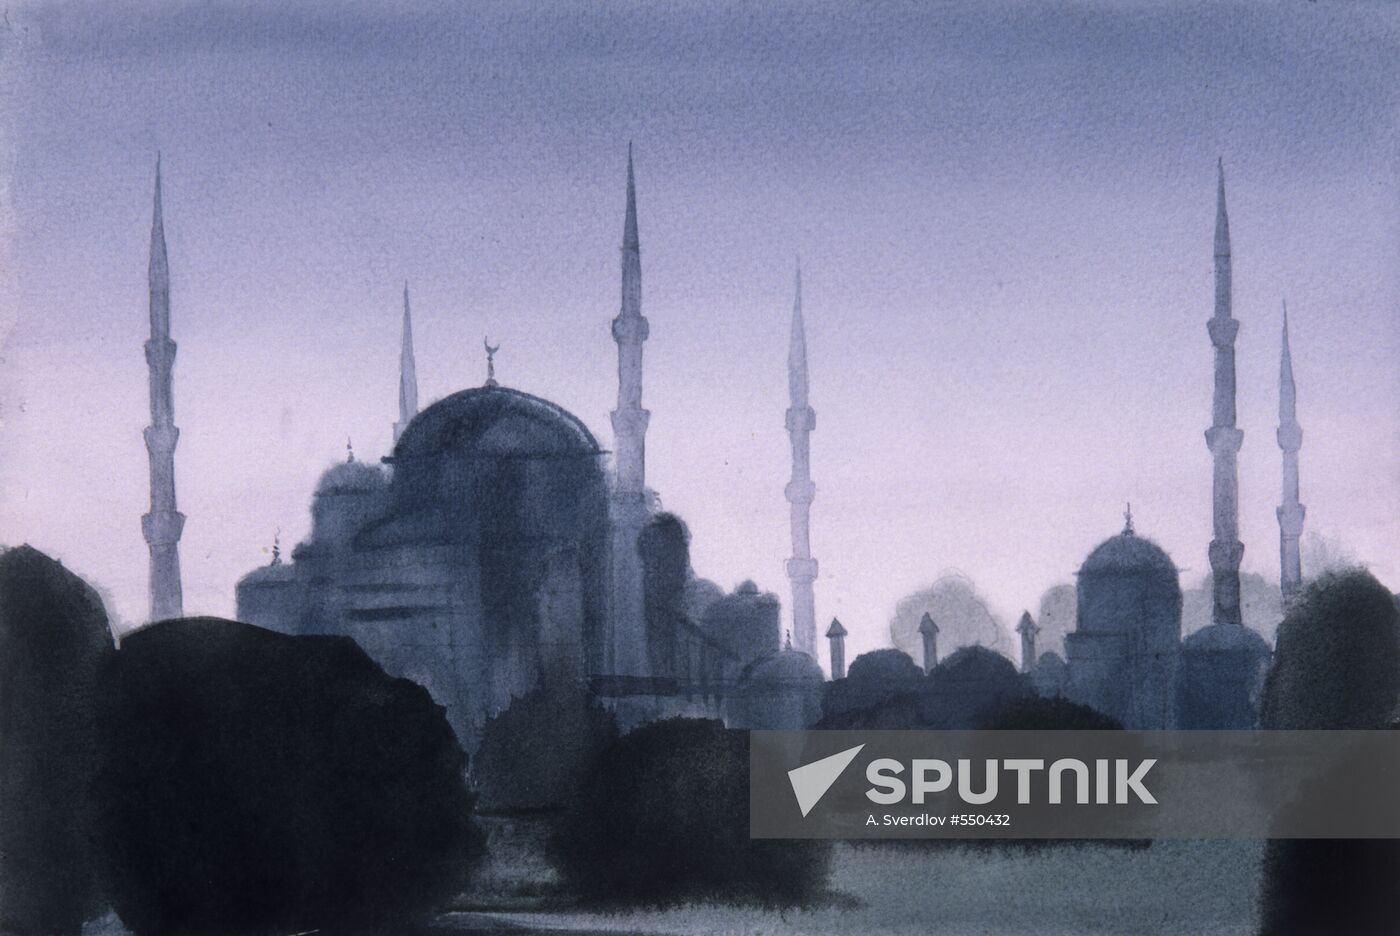 Reproduction of "Turkey. Istanbul. Blue Mosque" by Novozhilov